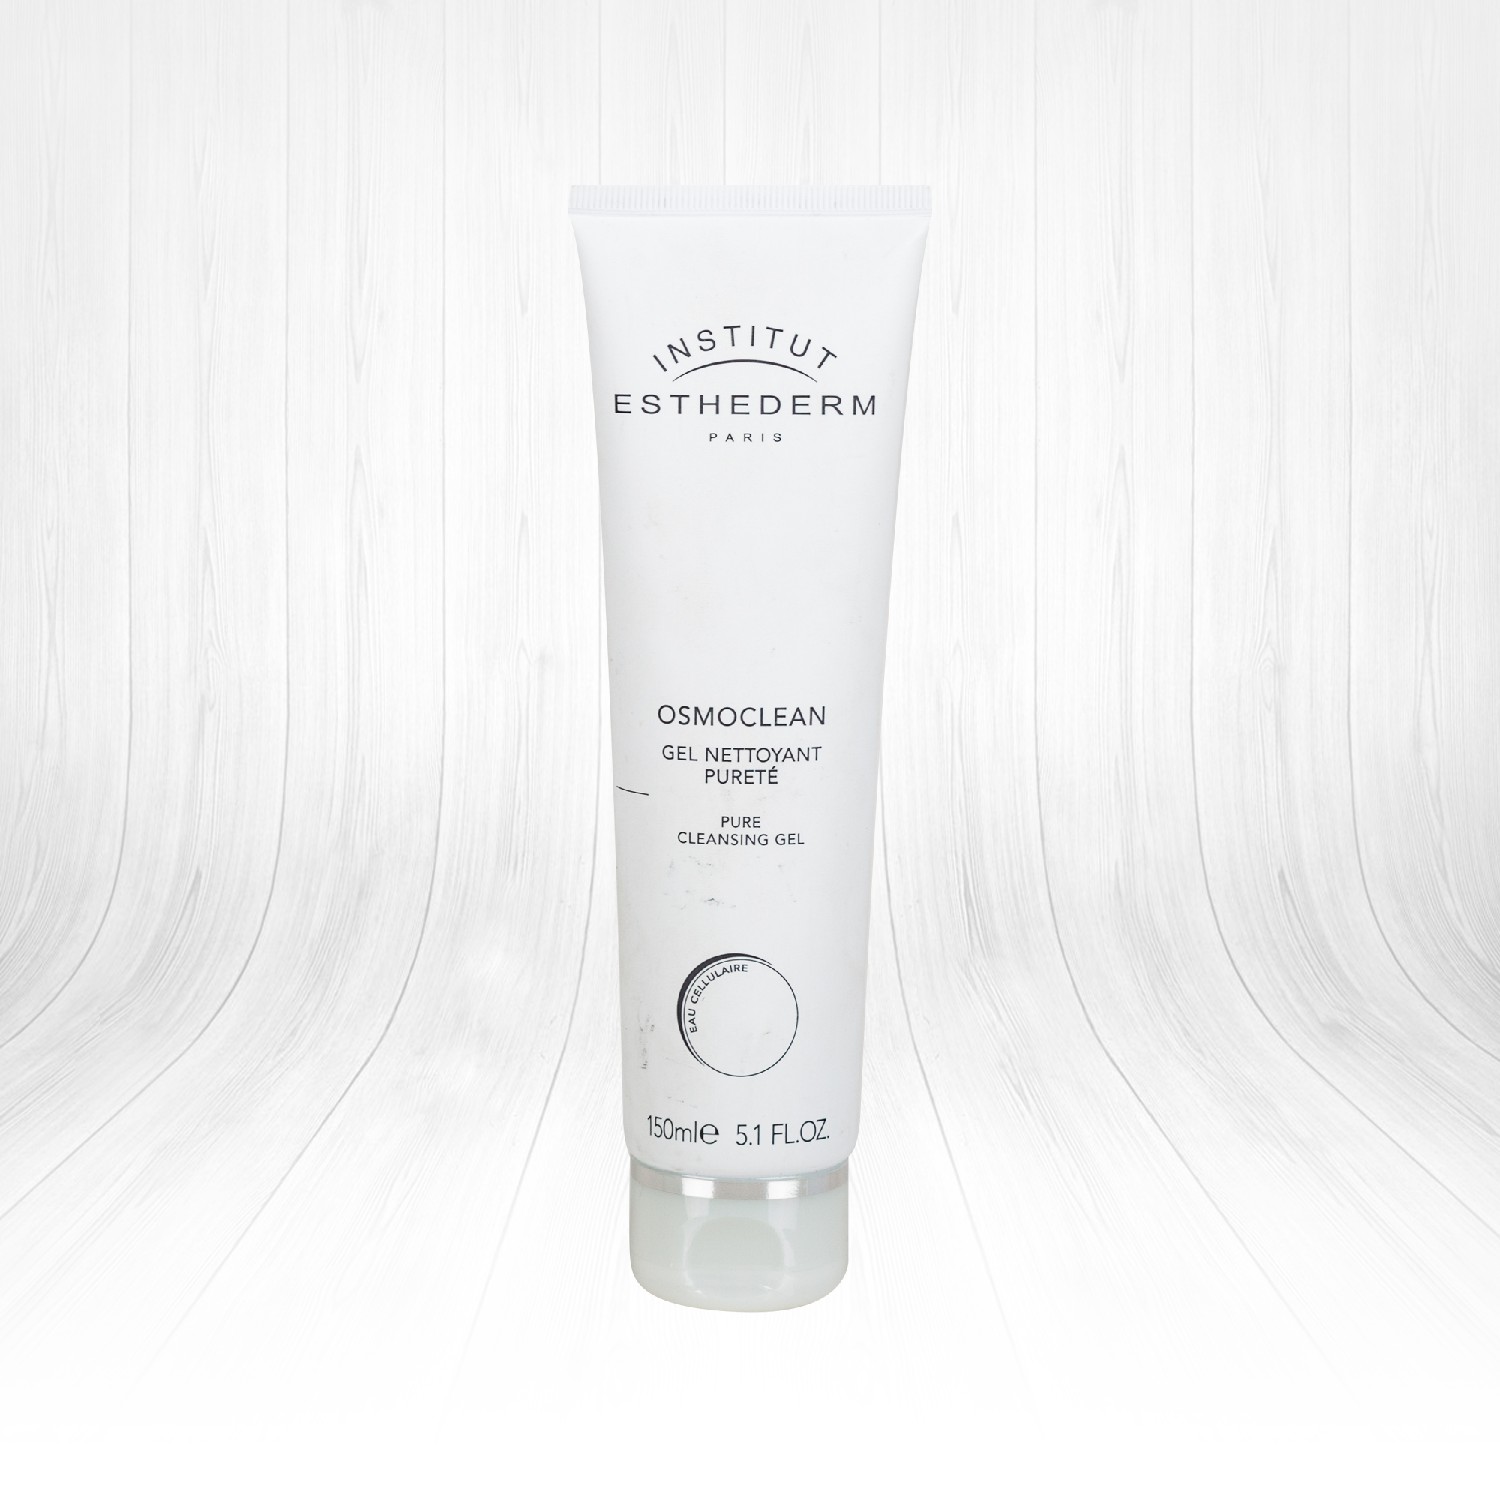 Esthederm Osmoclean Pure Cleansing Gel